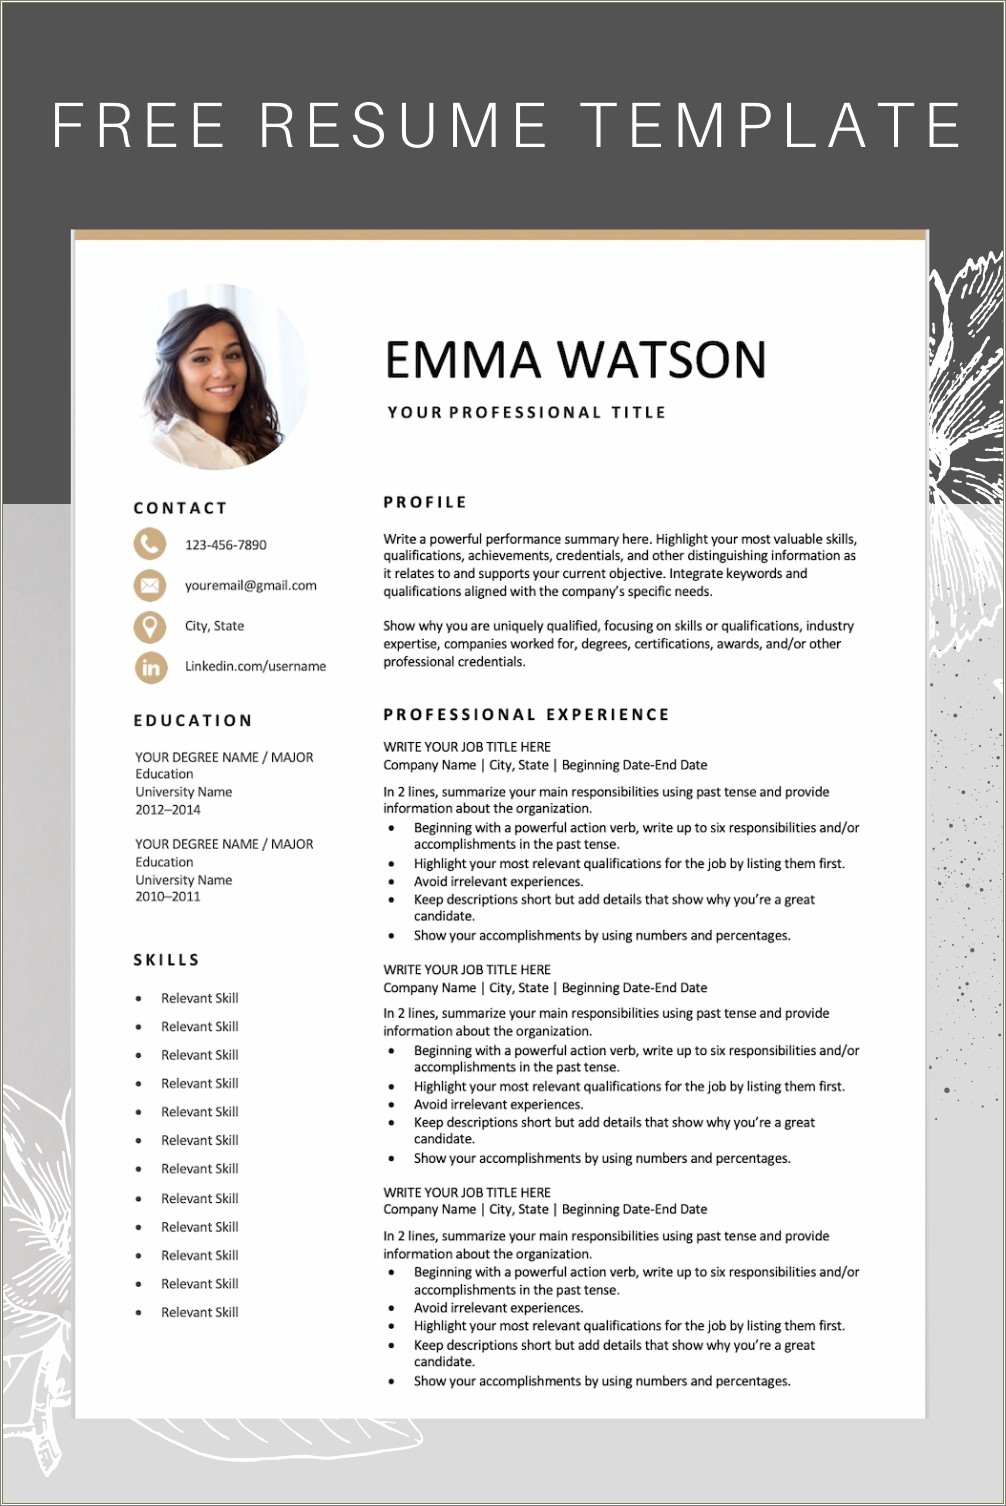 Free Downloadable Resume Templates With Phot